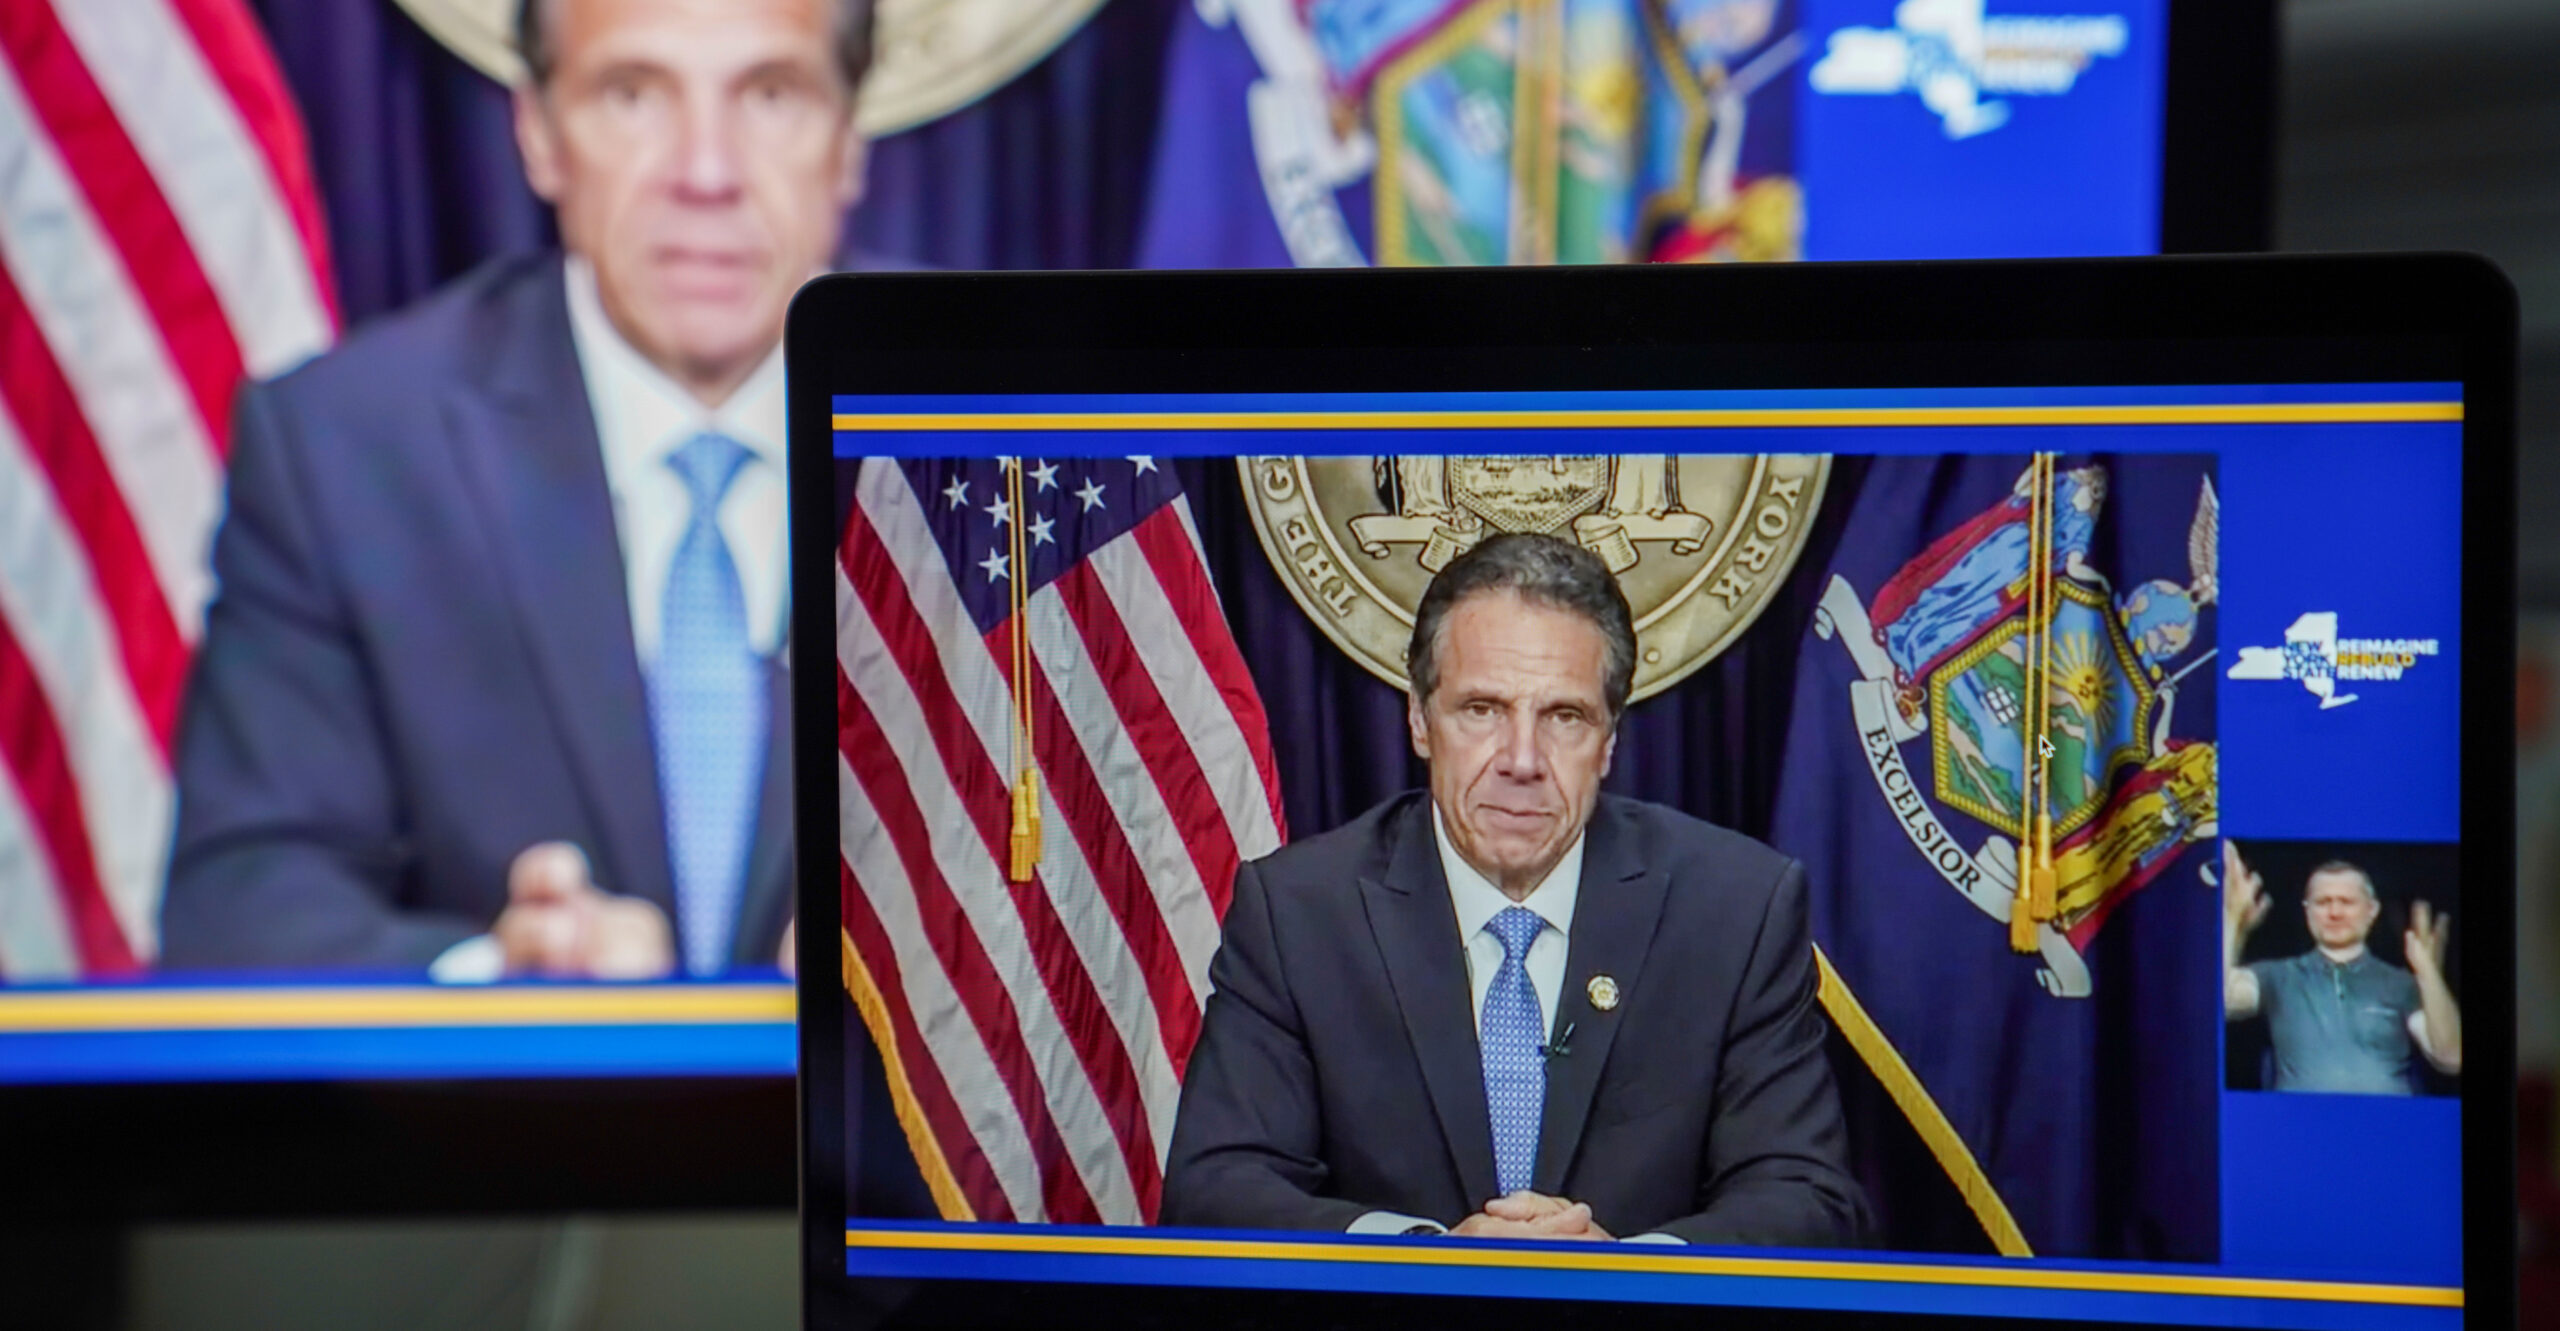 Cuomo Ducked Impeachment, but These Governors Didn't